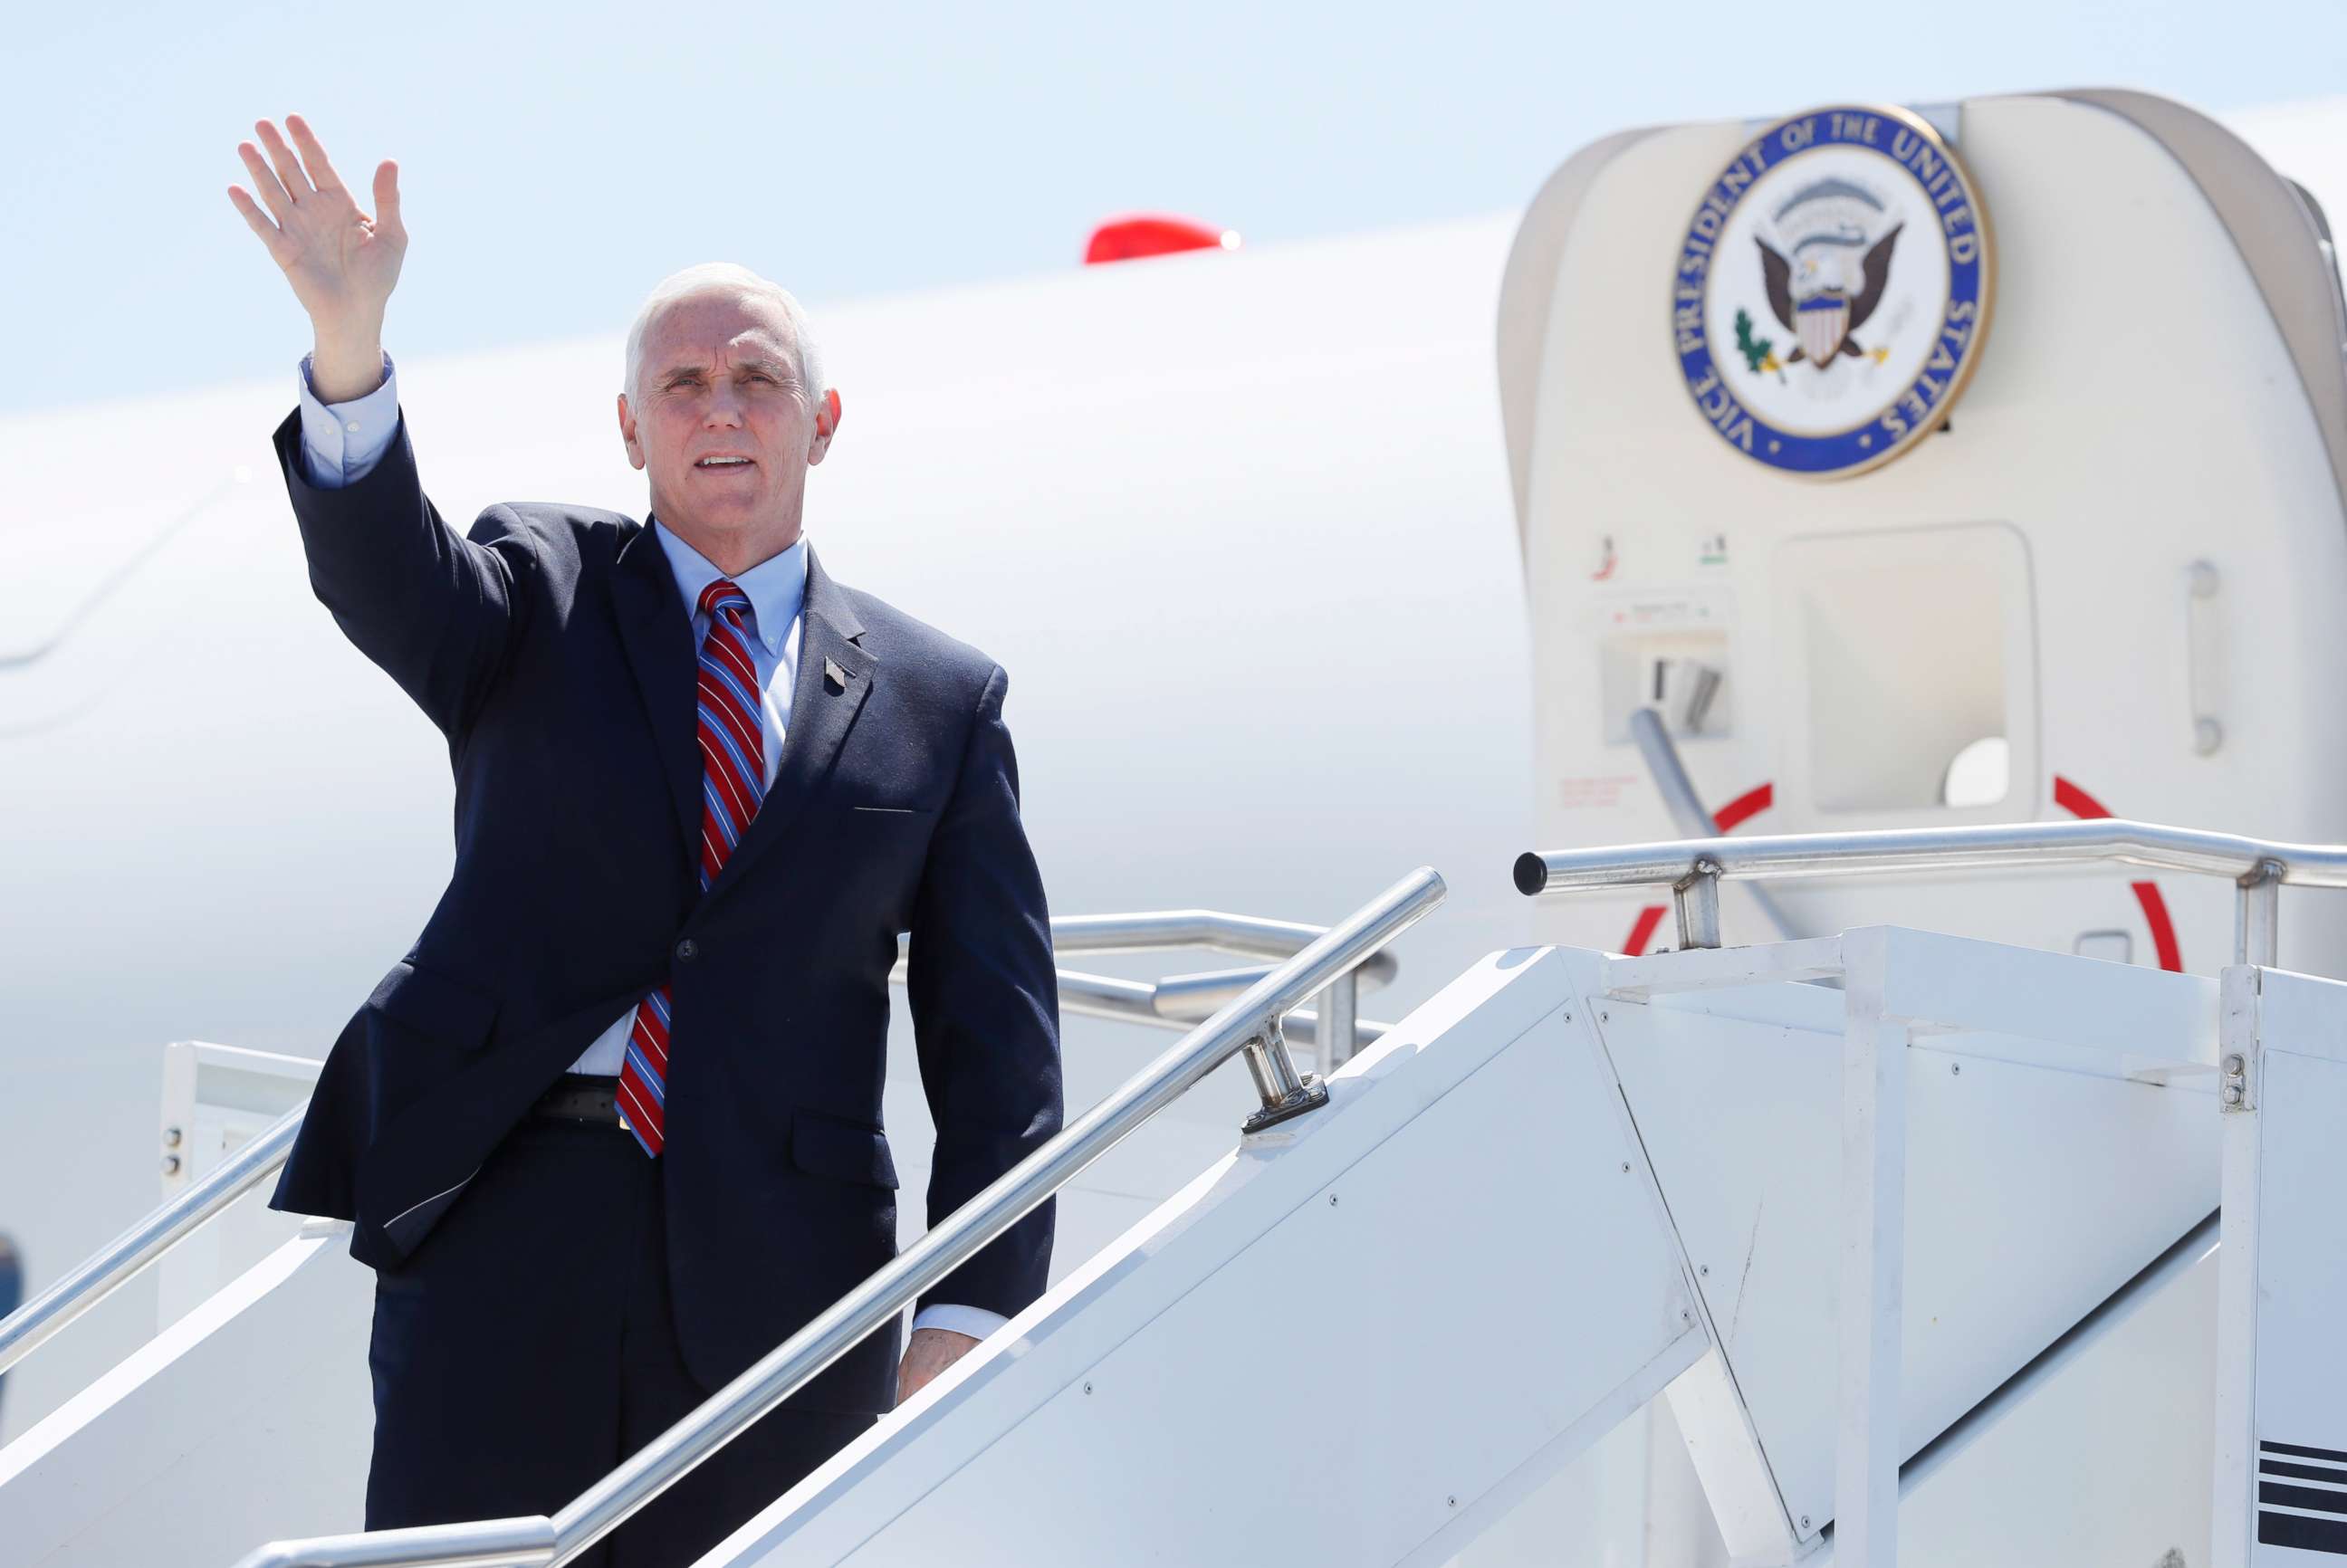 PHOTO: Vice President Mike Pence waves as he stops off Air Force Two after arriving at the Des Moines International Airport, May 8, 2020, in Des Moines, Iowa.